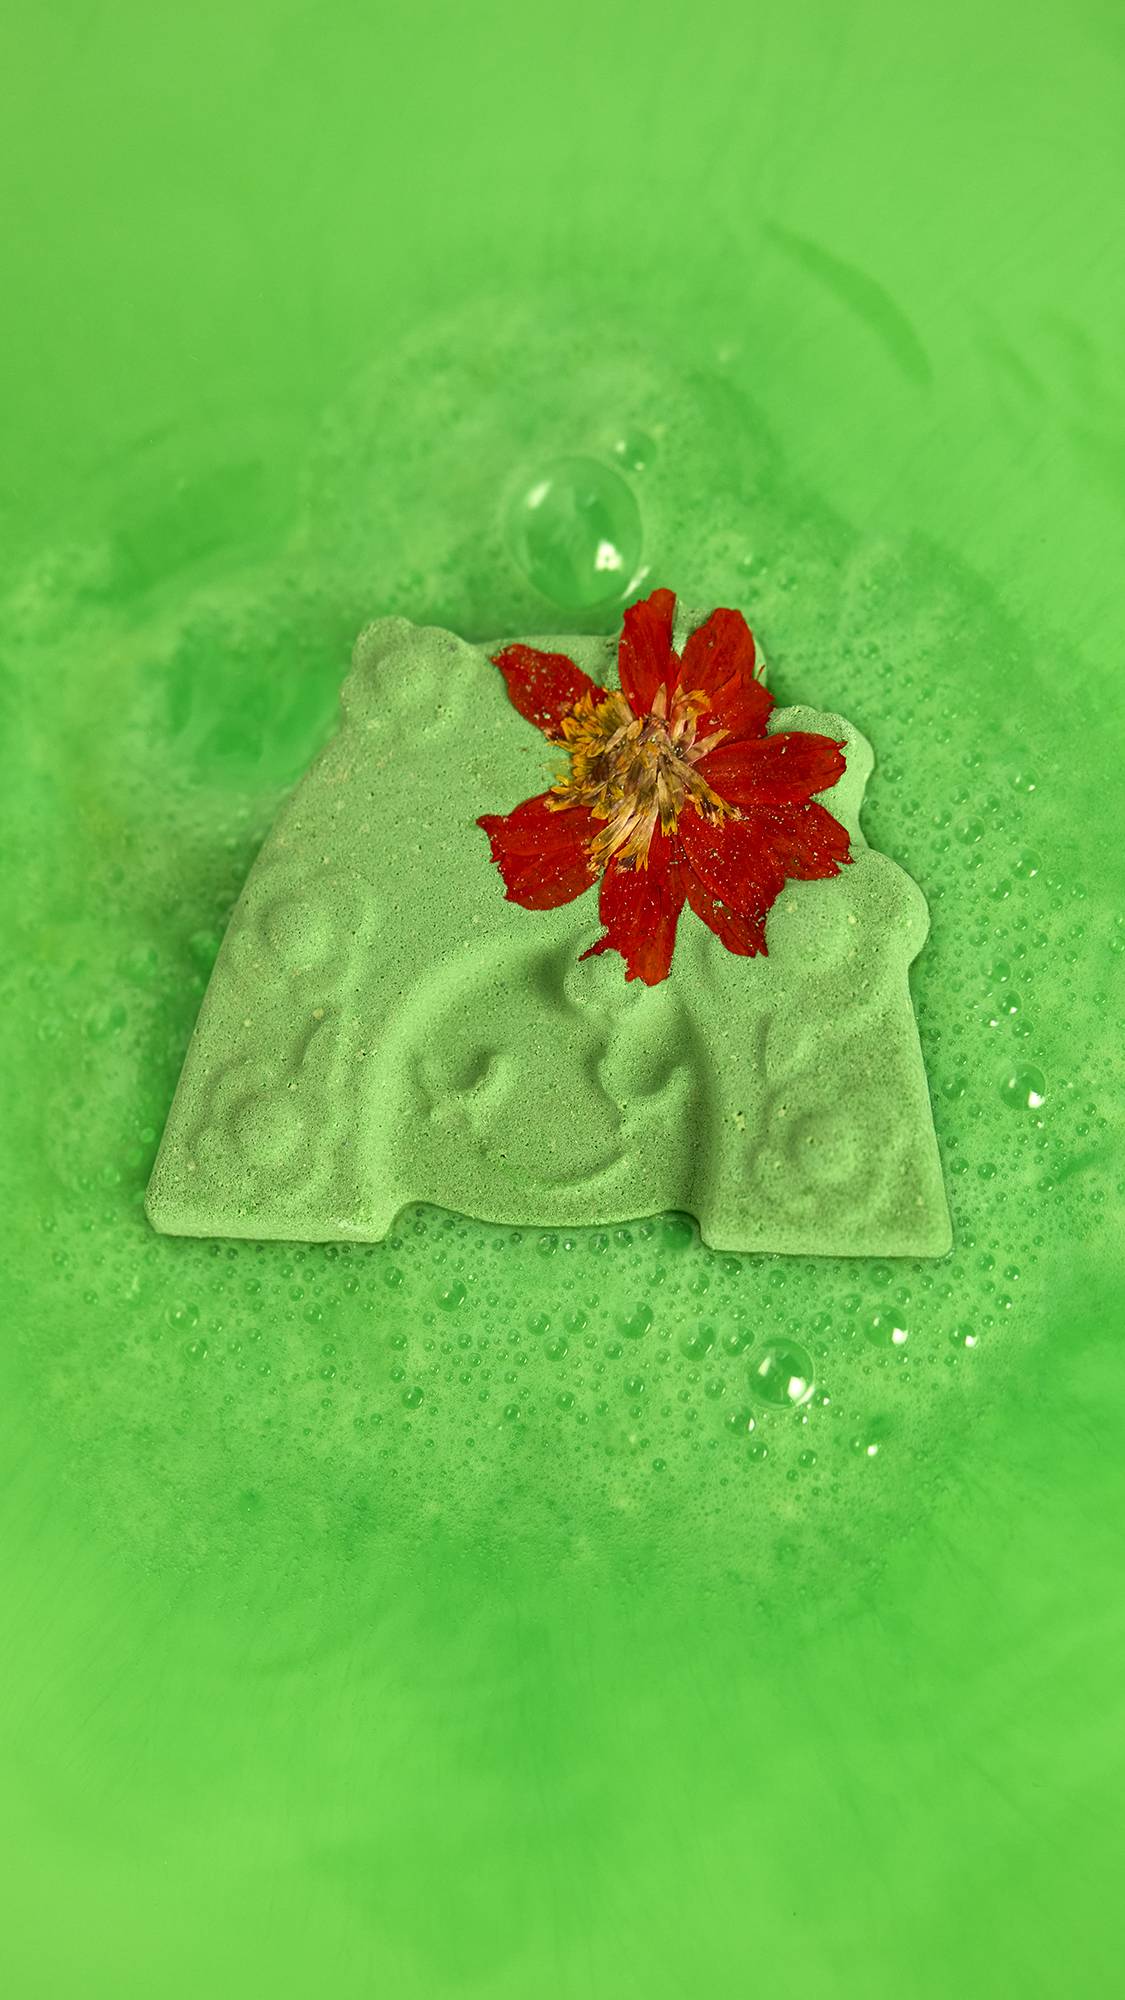 The Mother Nature bath bomb sits, dissolving and creating vibrant, neon-green bath water. 